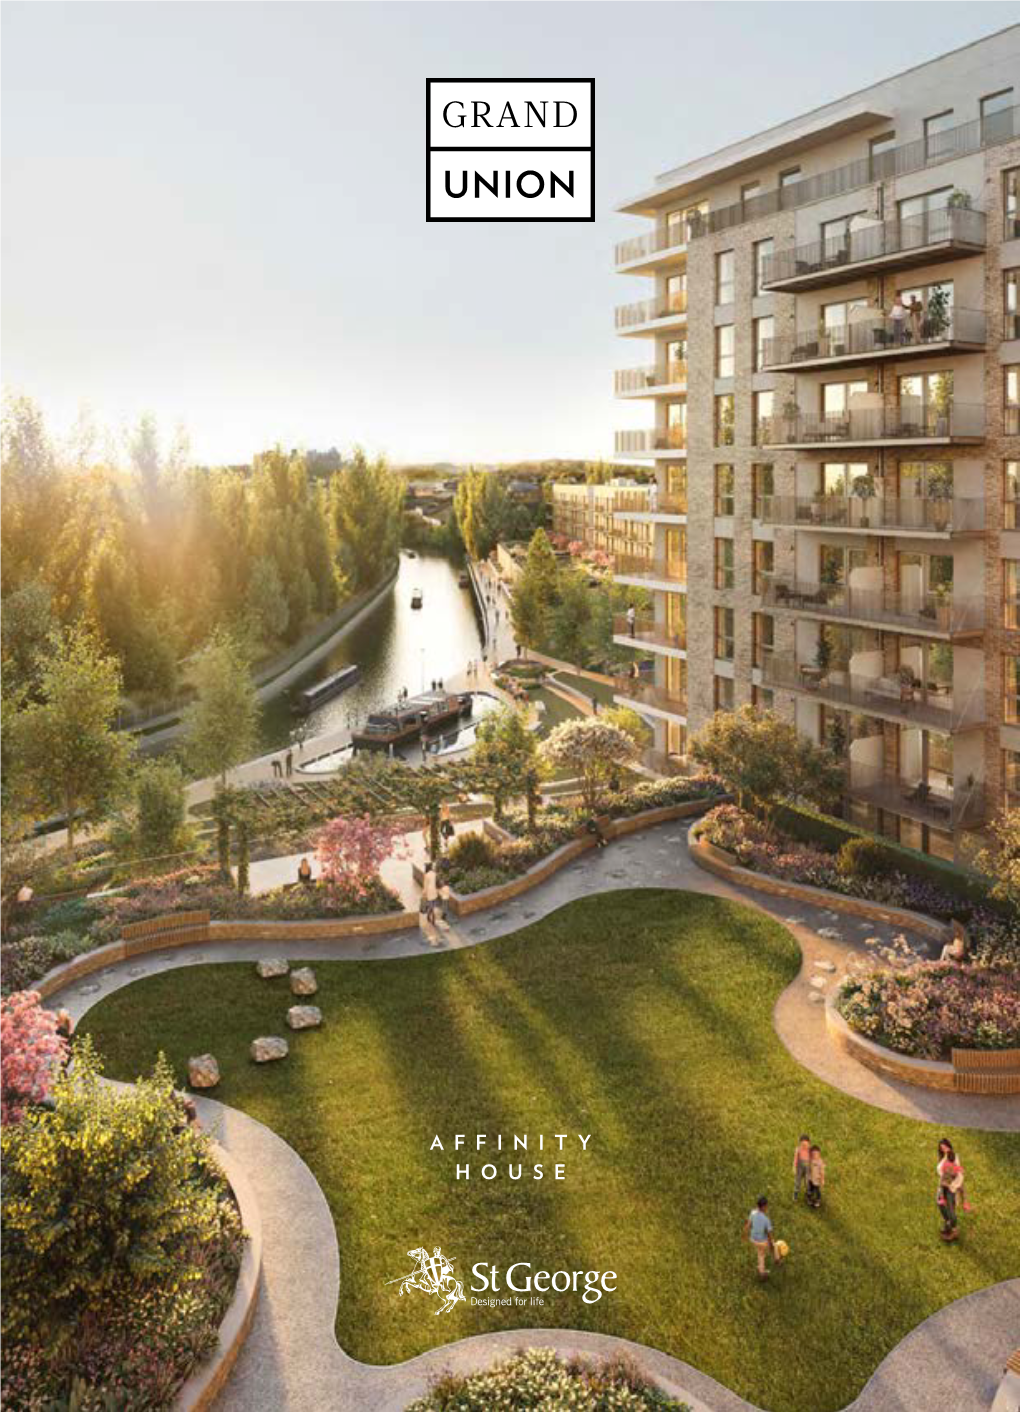 Affinity House Brochure